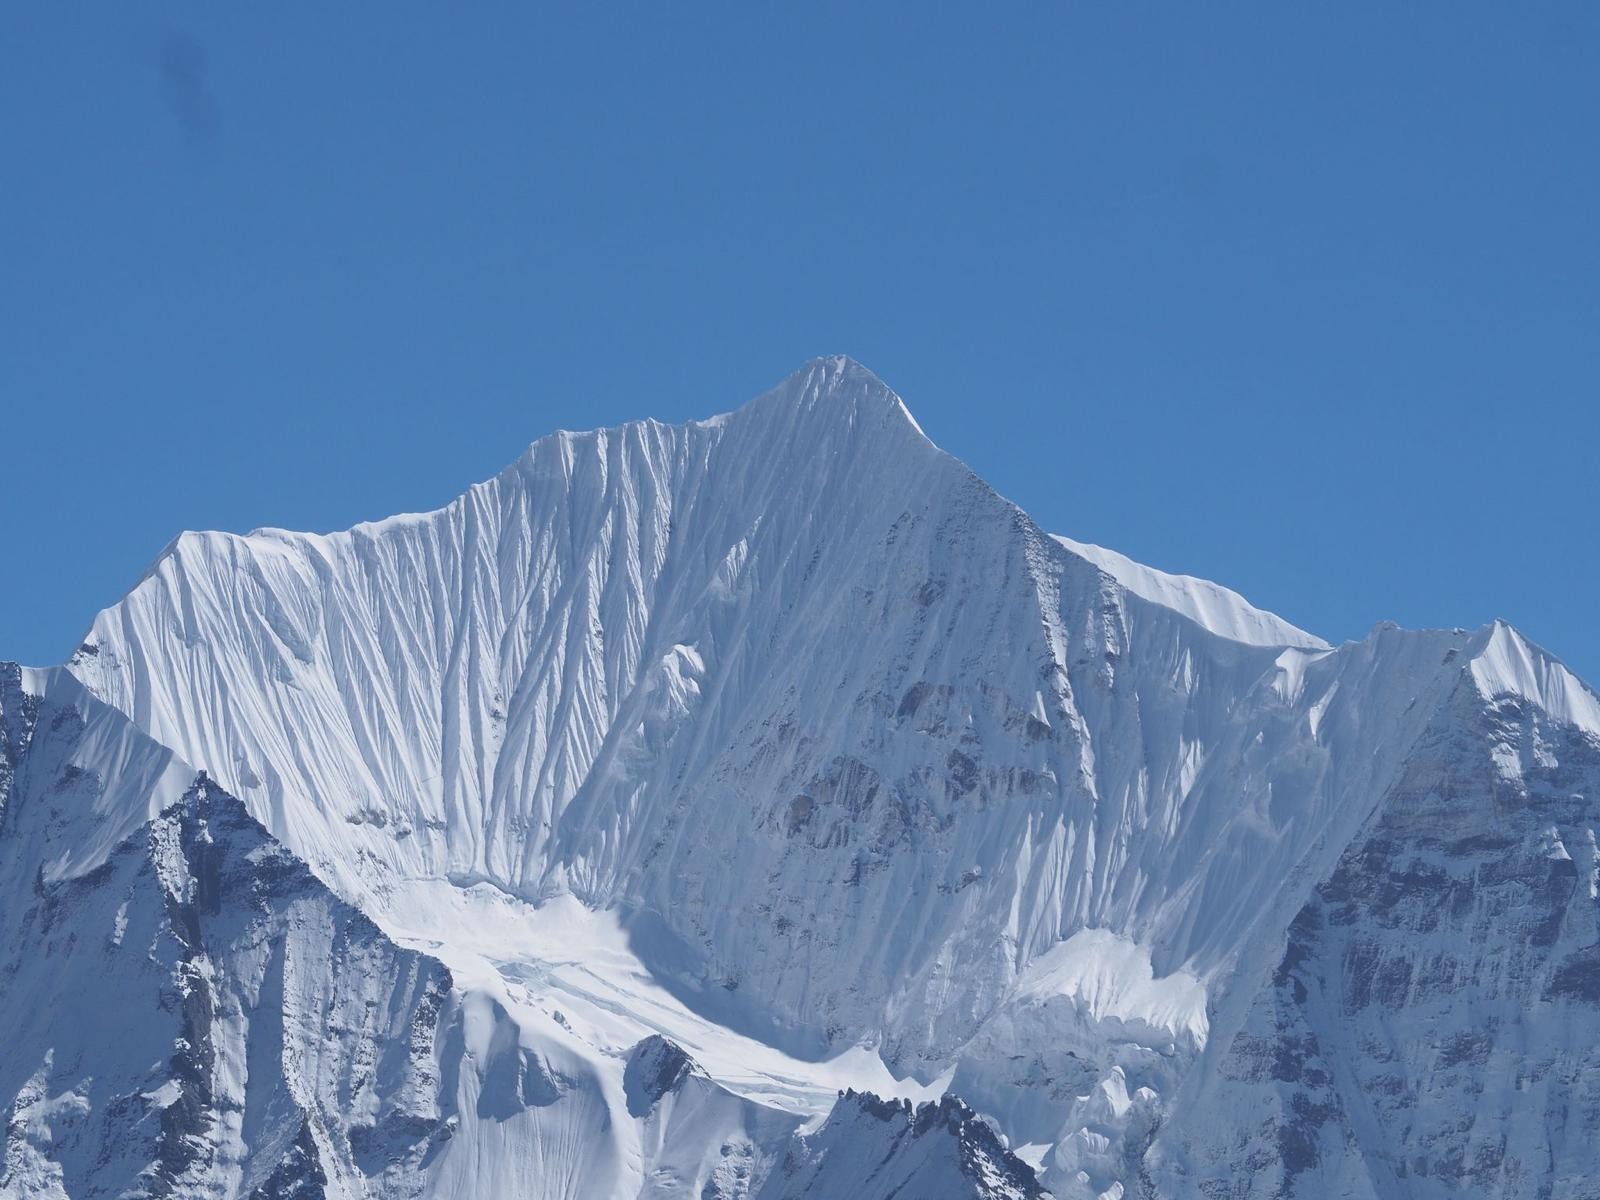 GHANGCHENPO EXPEDITION (6378M)